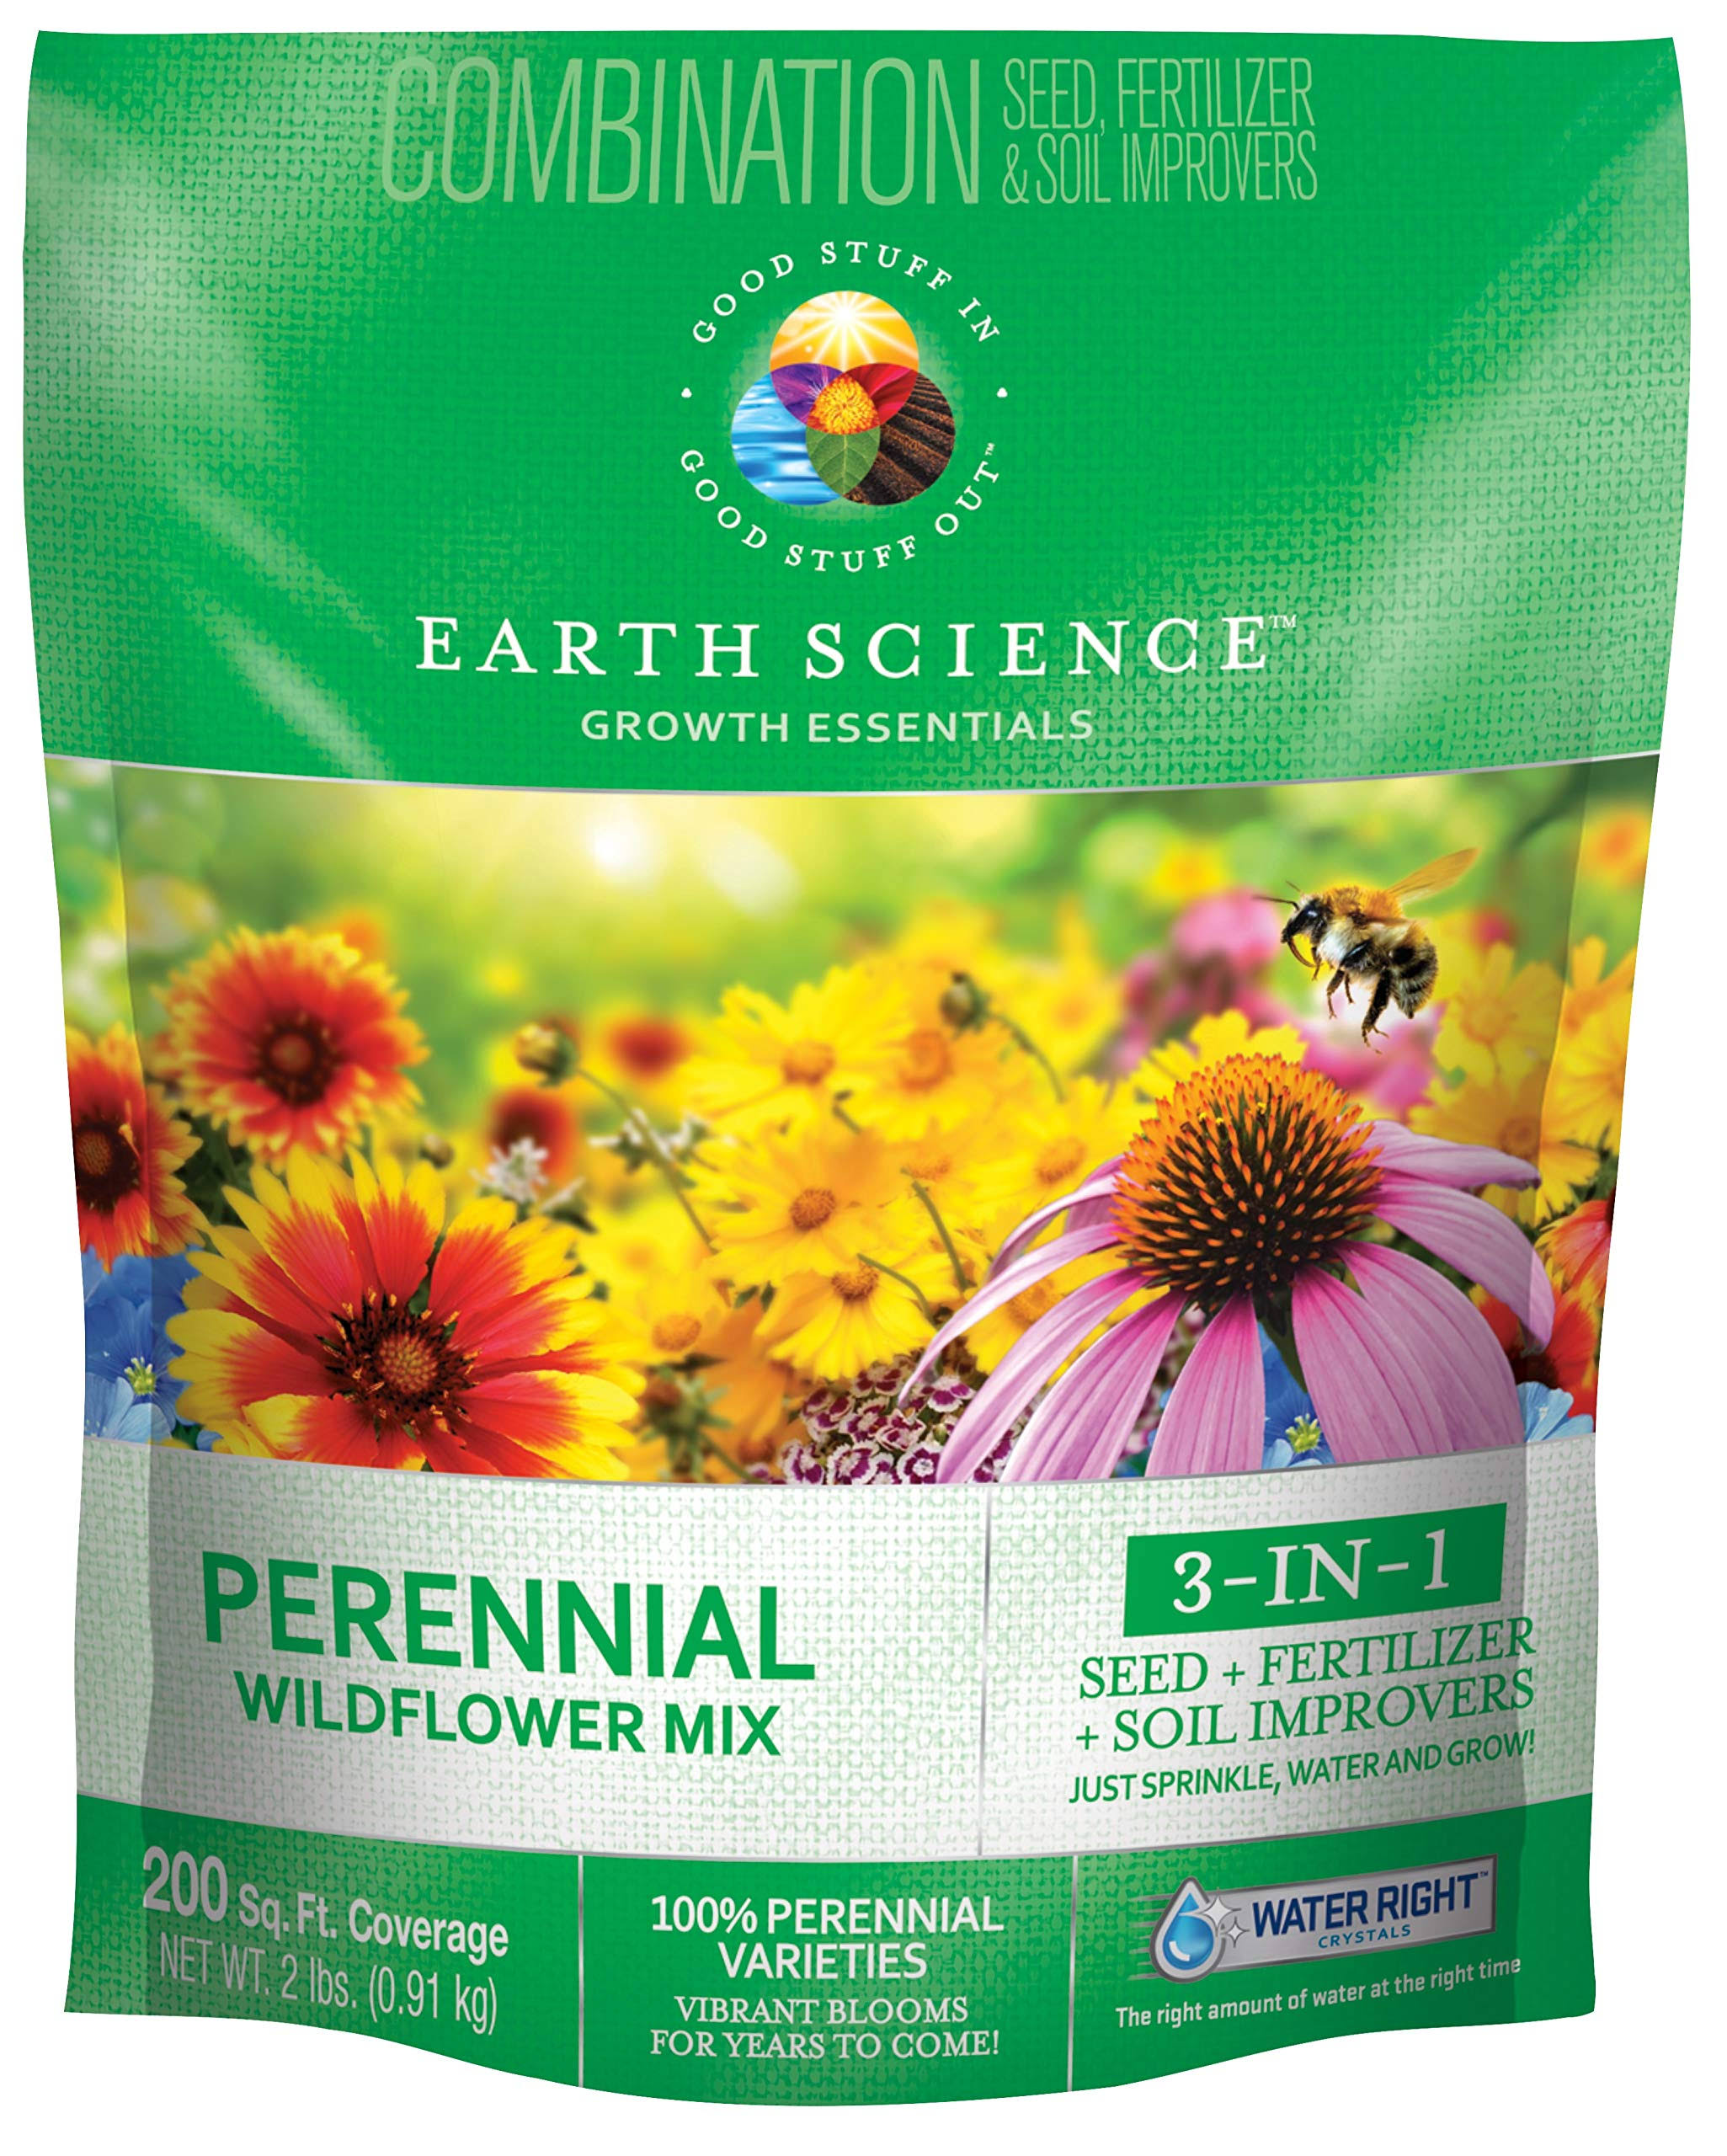 Earth Science 2 lb Perennial Wildflower Mix